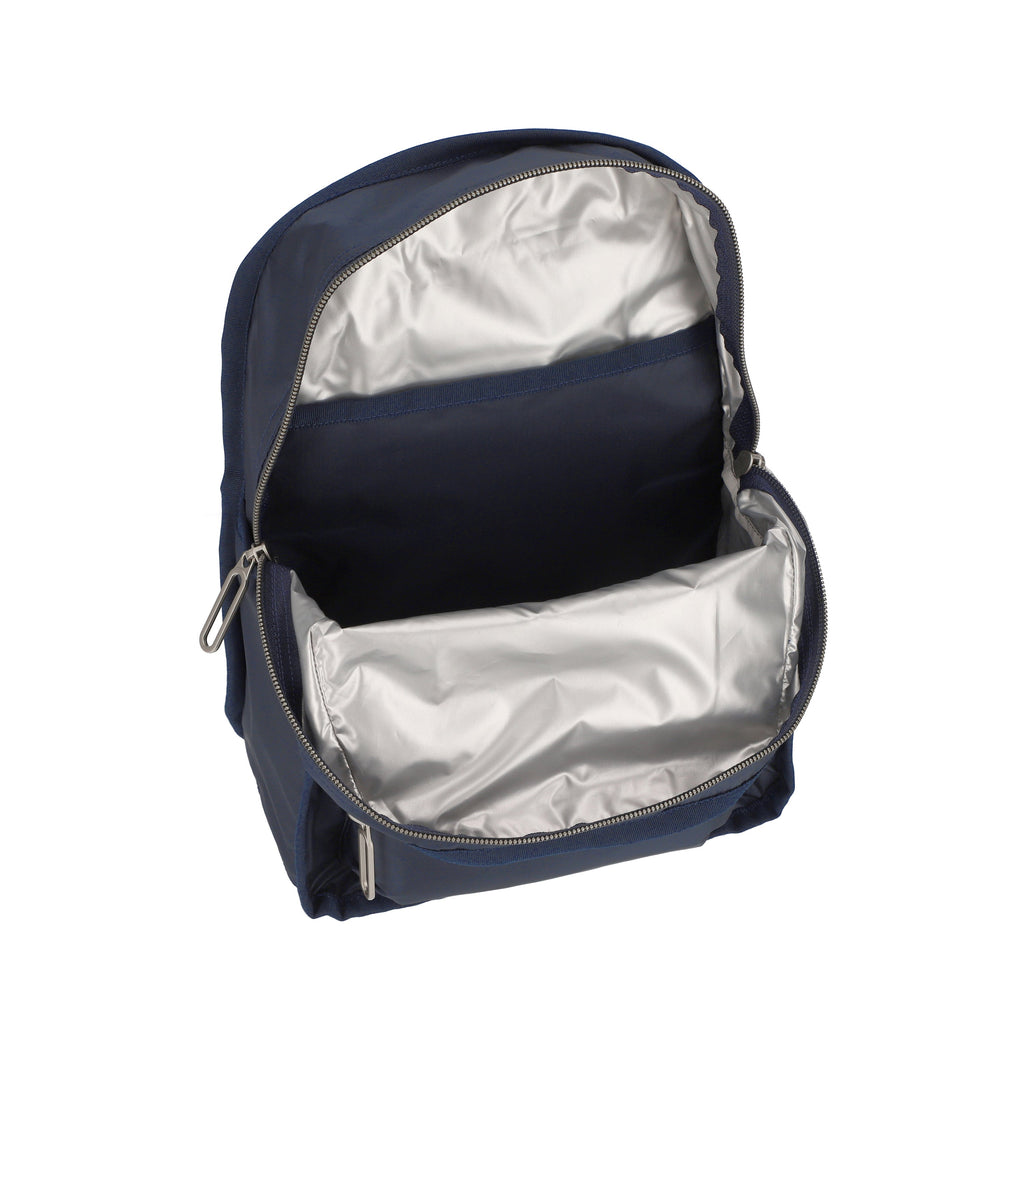 Small Functional Backpack - 22148457300016